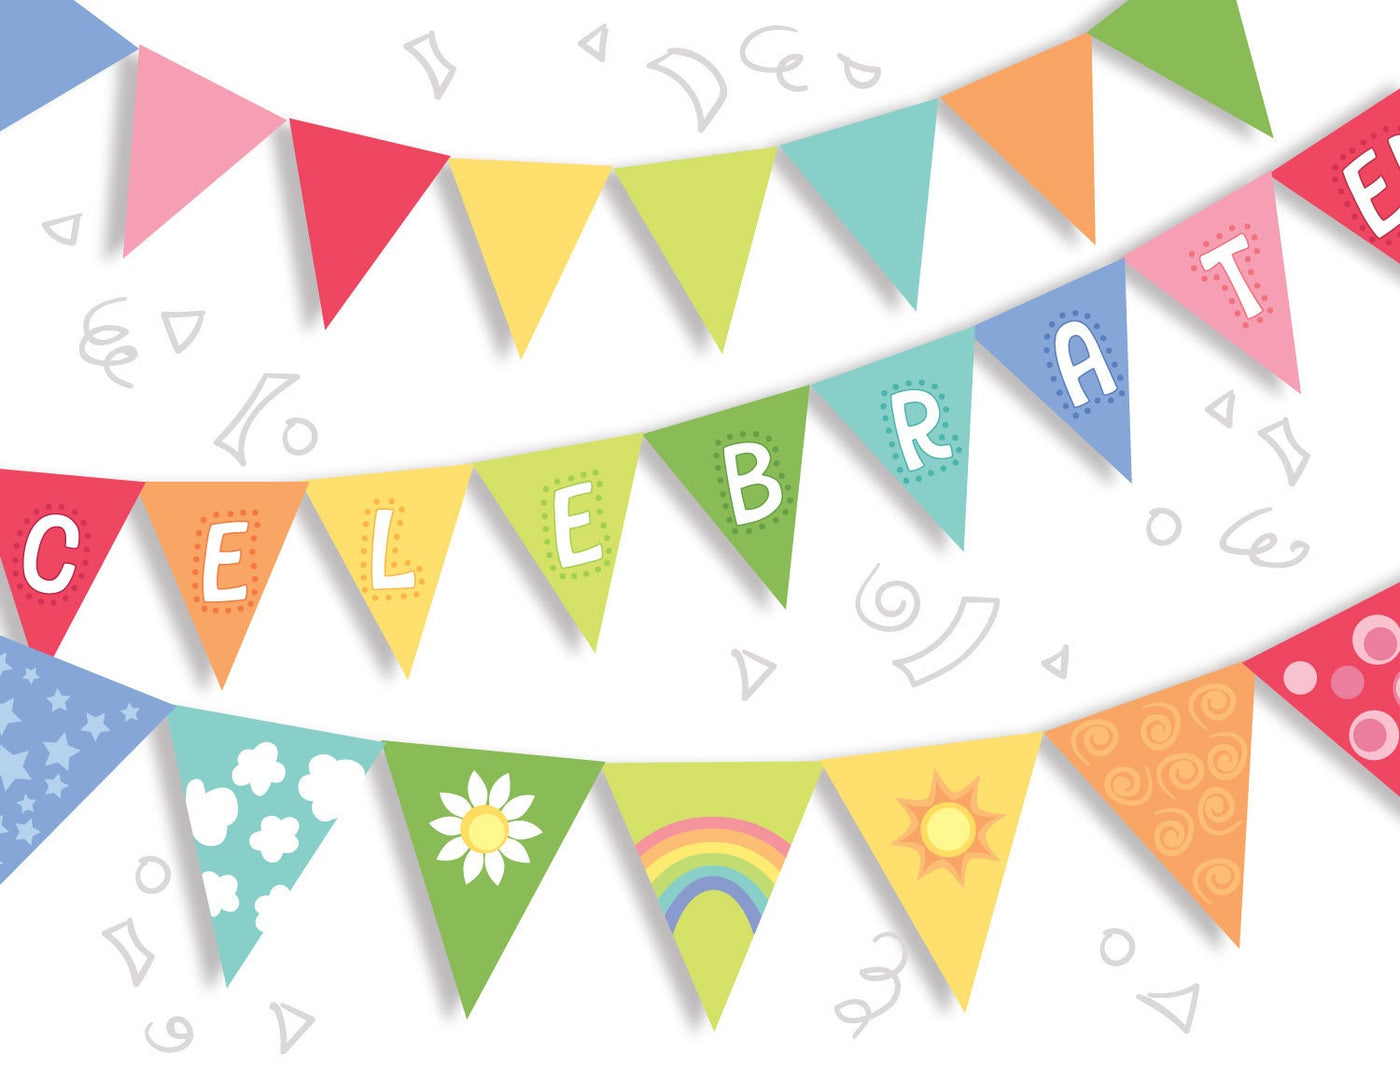 Printable Rainbow Pennants Garland party decorations